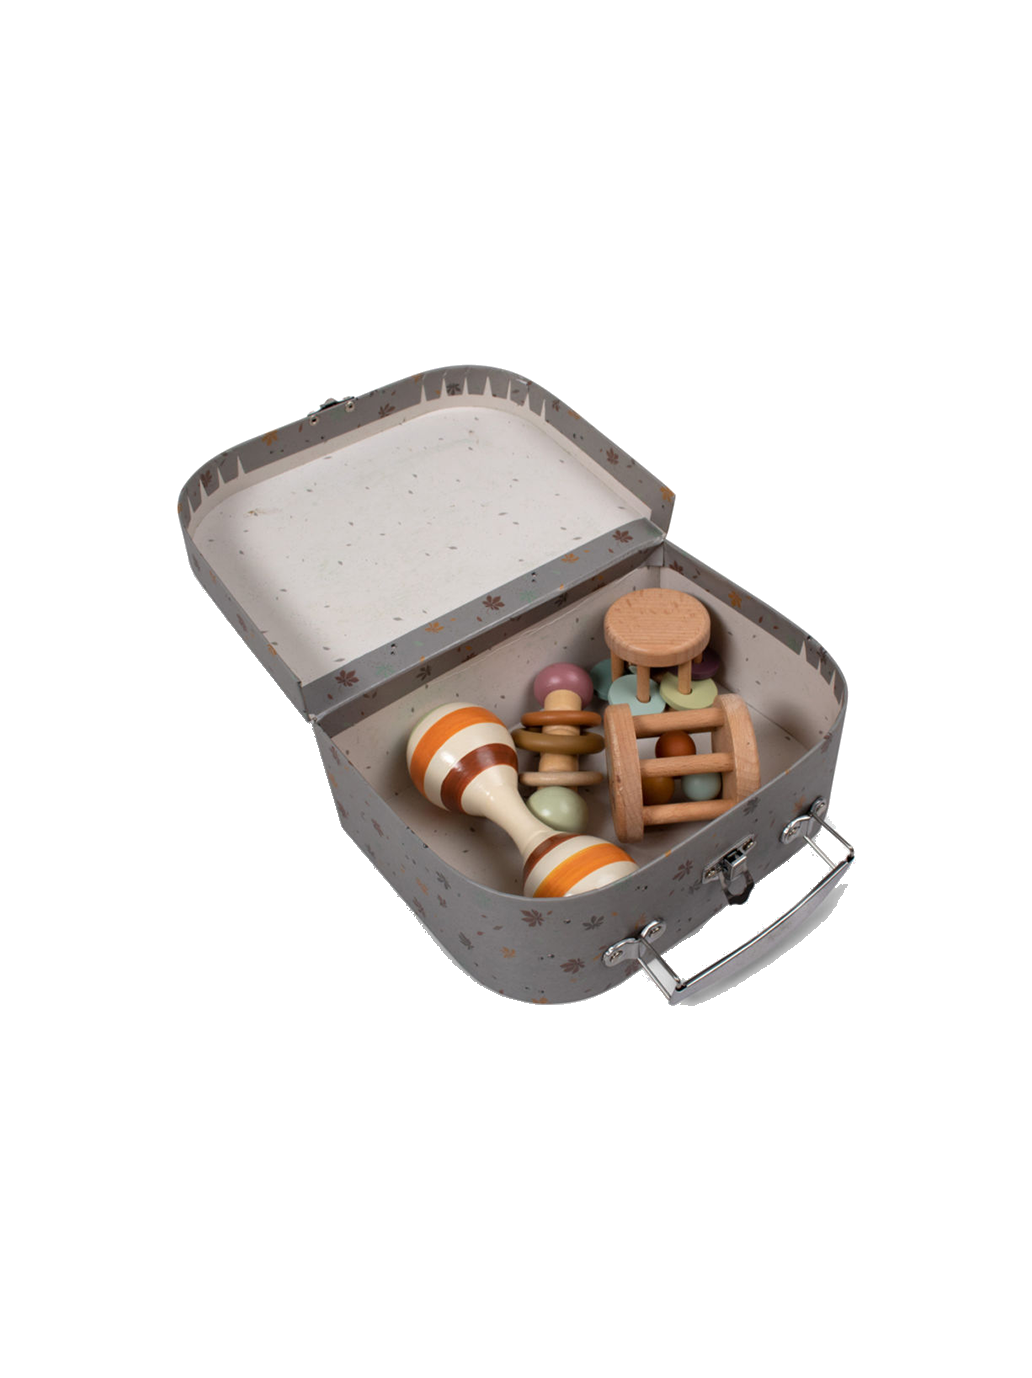 Wooden sensory toys in a case